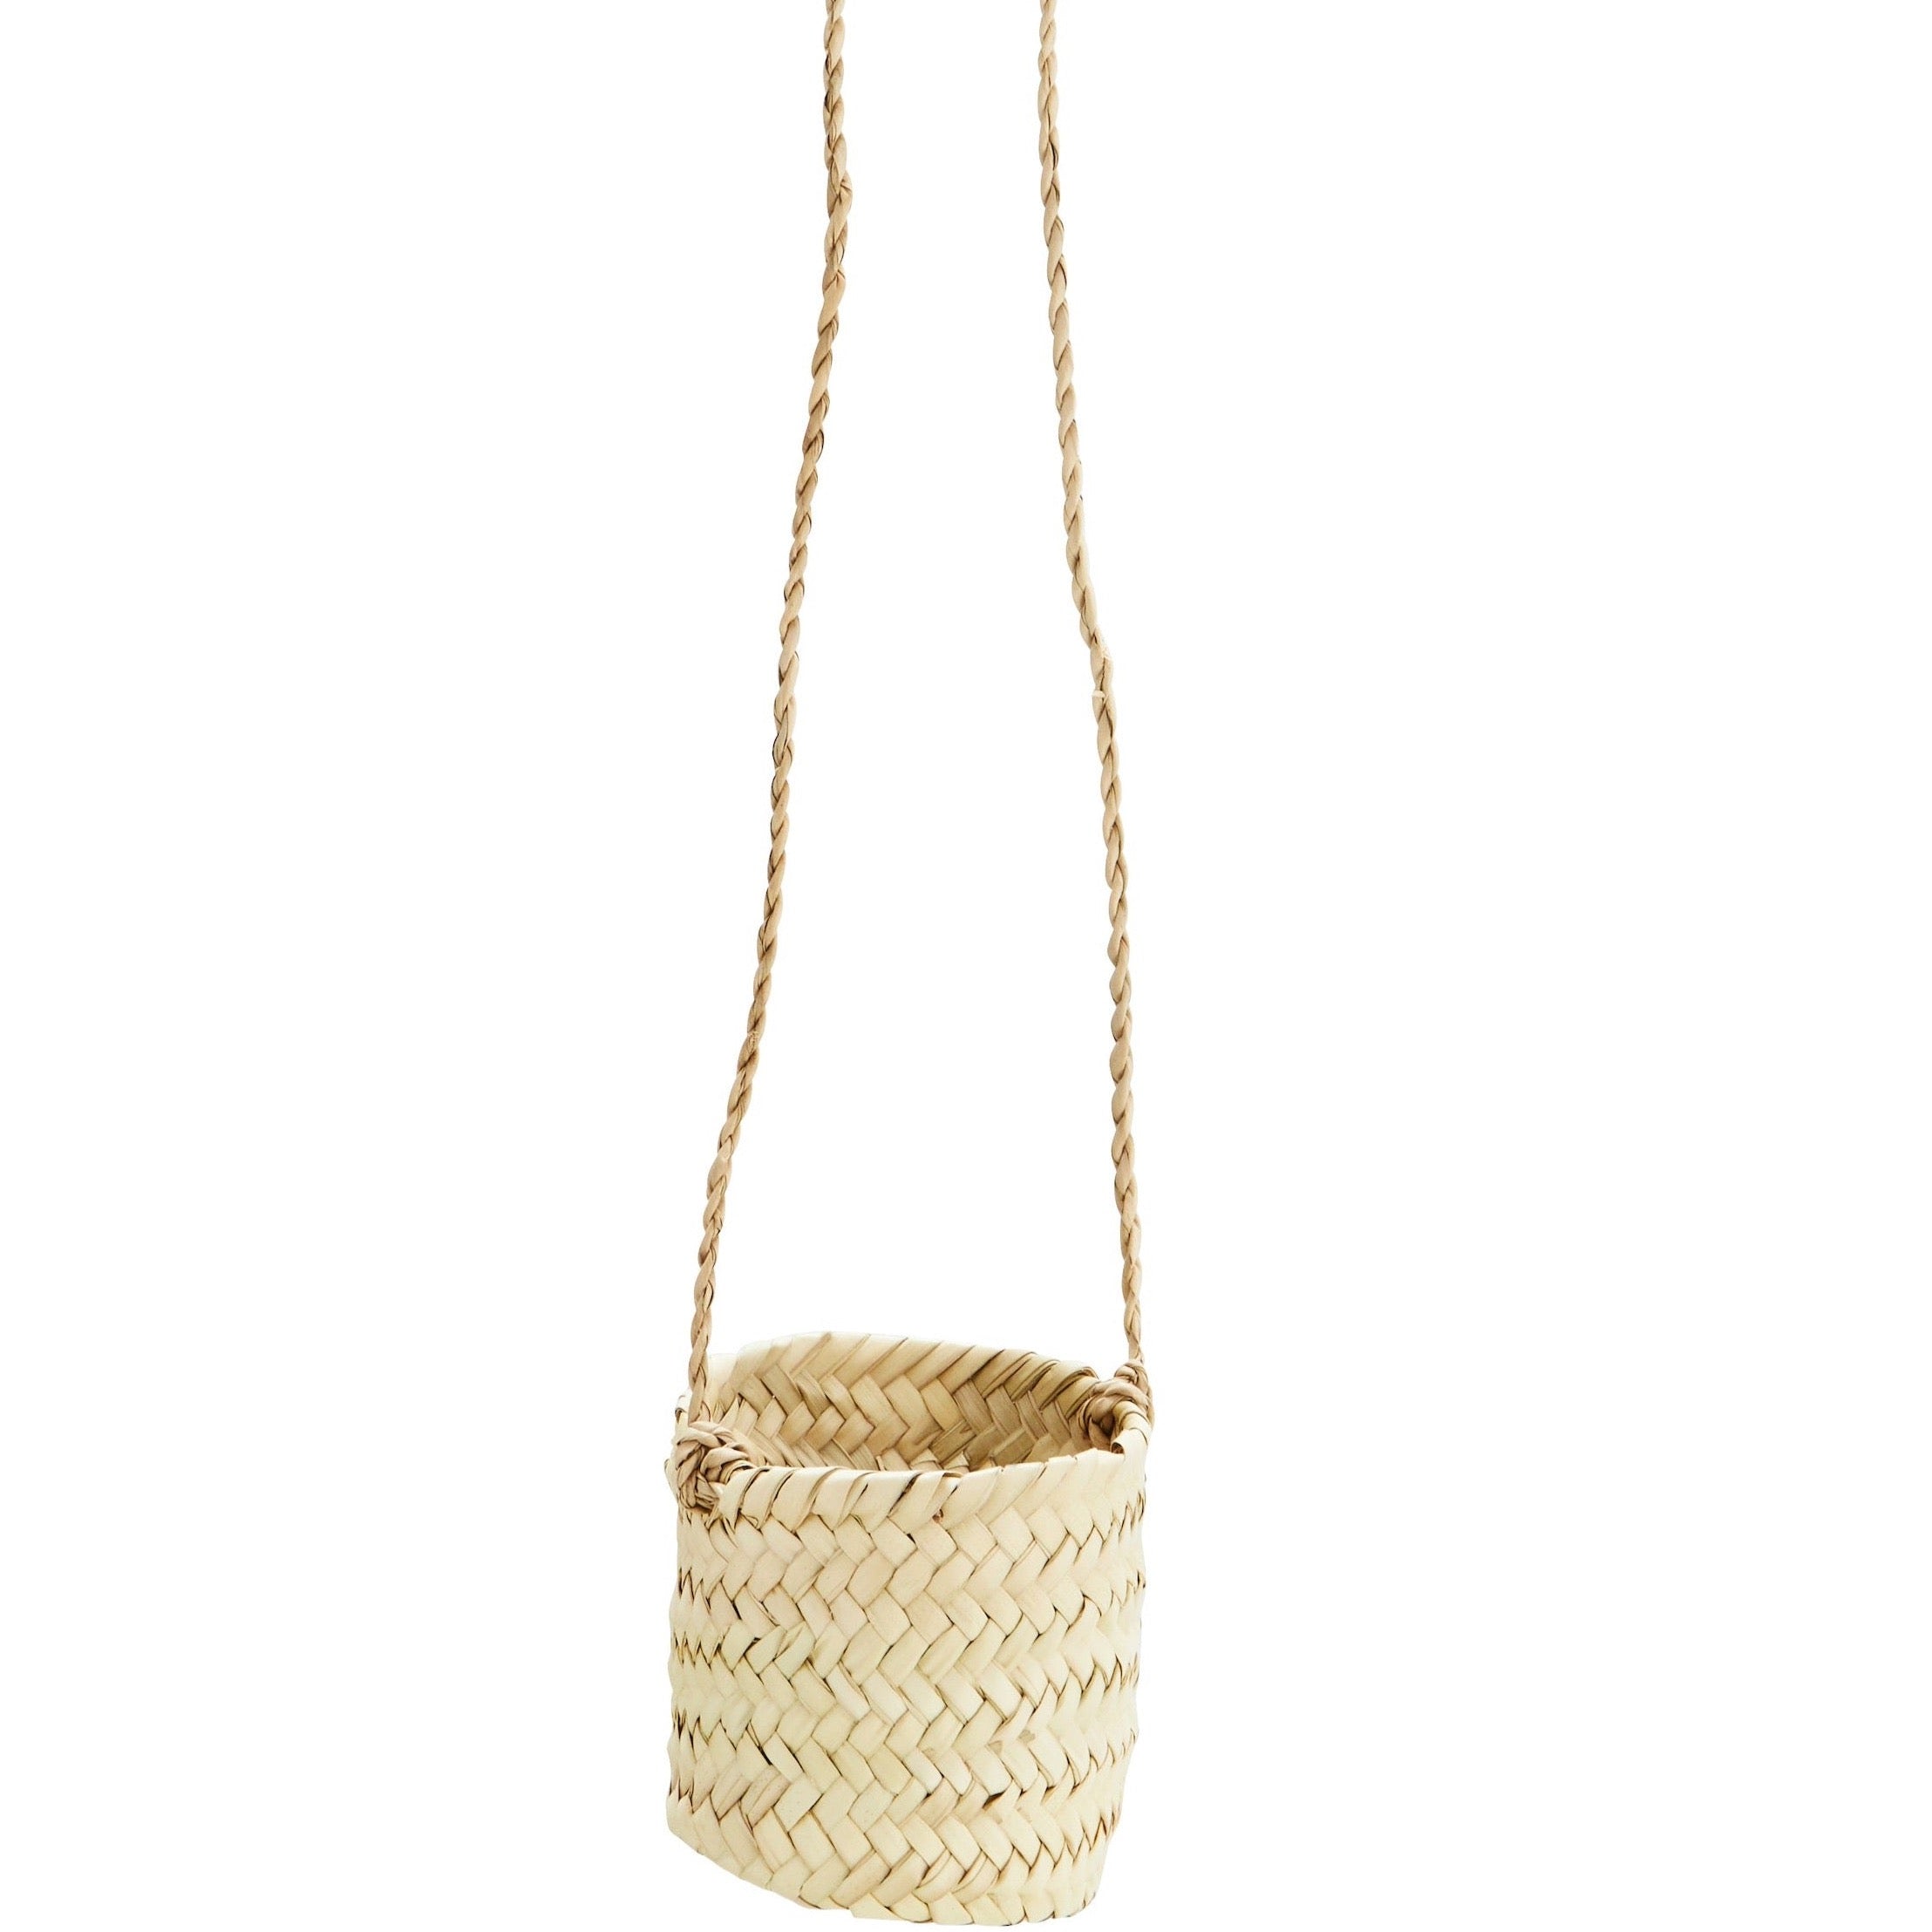 Grass woven hanging basket with a long hanging strap on a plain white background.